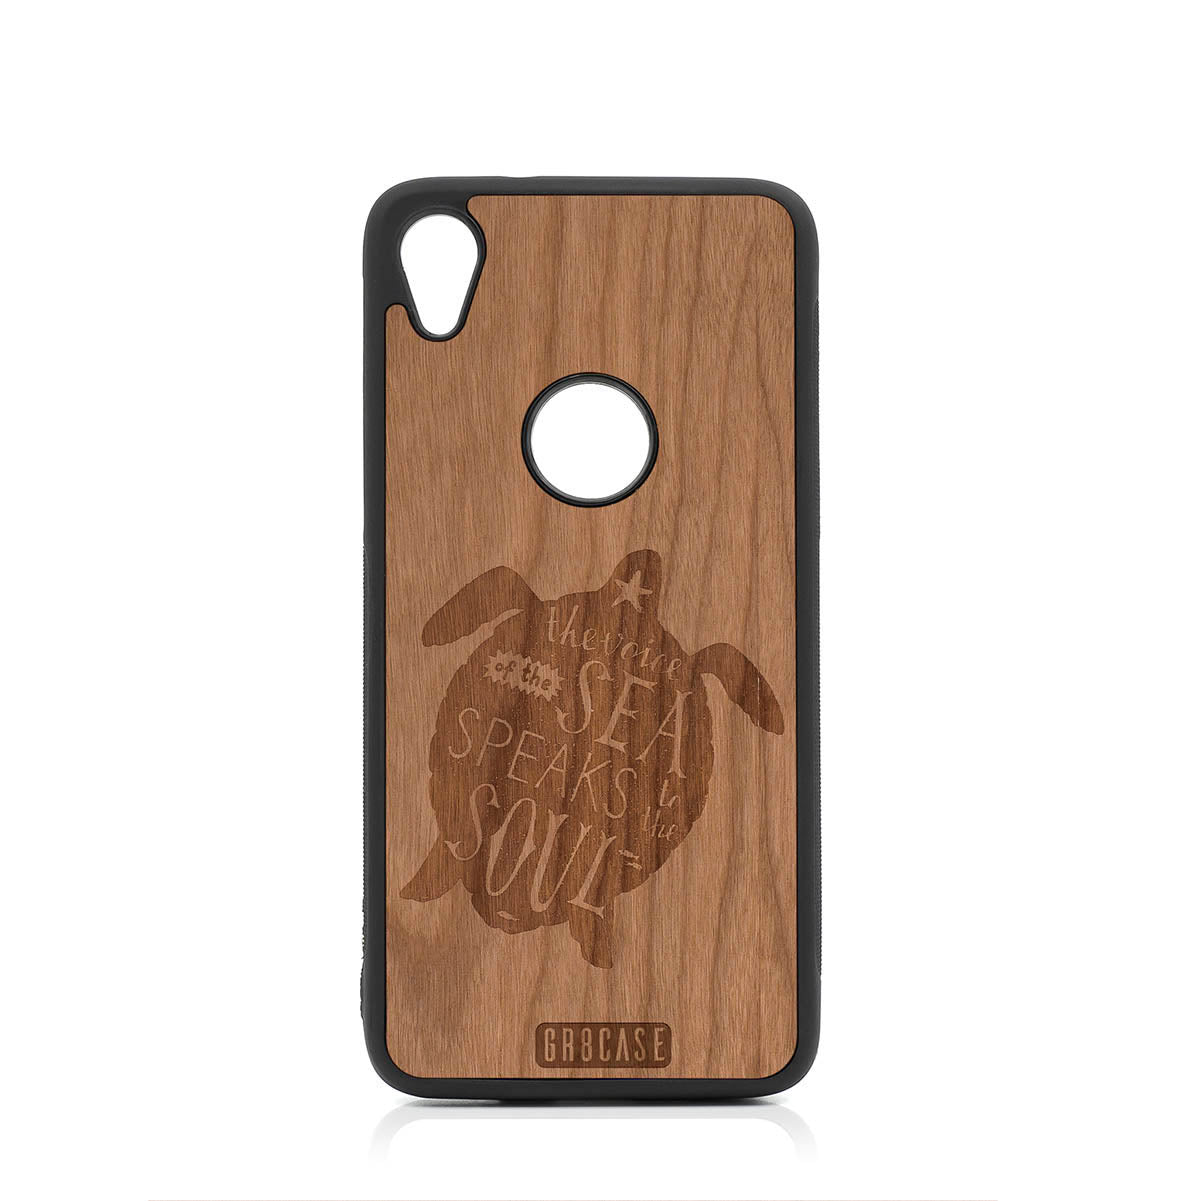 The Voice Of The Sea Speaks To The Soul (Turtle) Design Wood Case For Moto E6